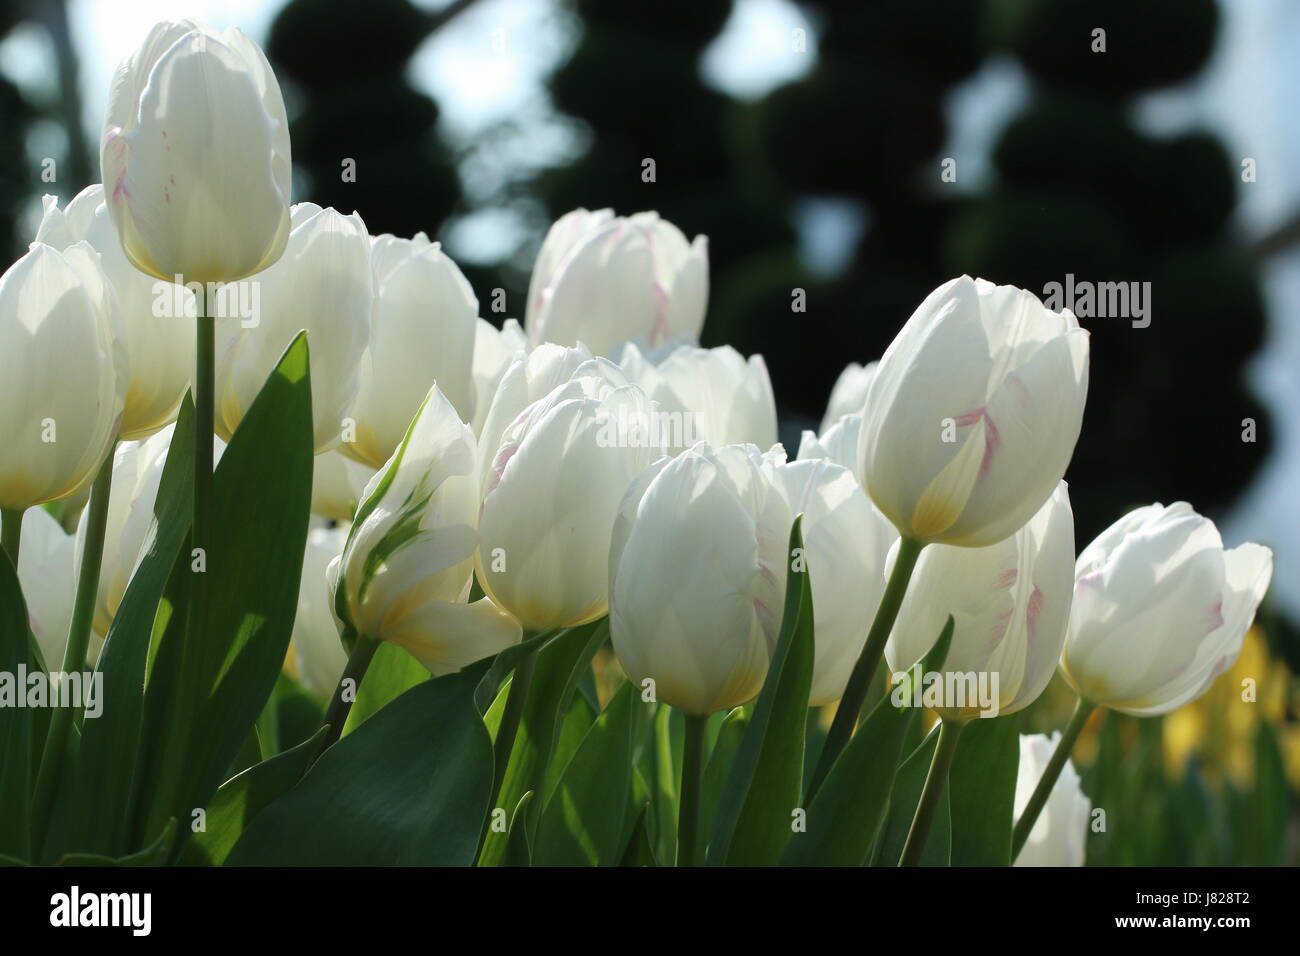 White tulips in a field Stock Photo